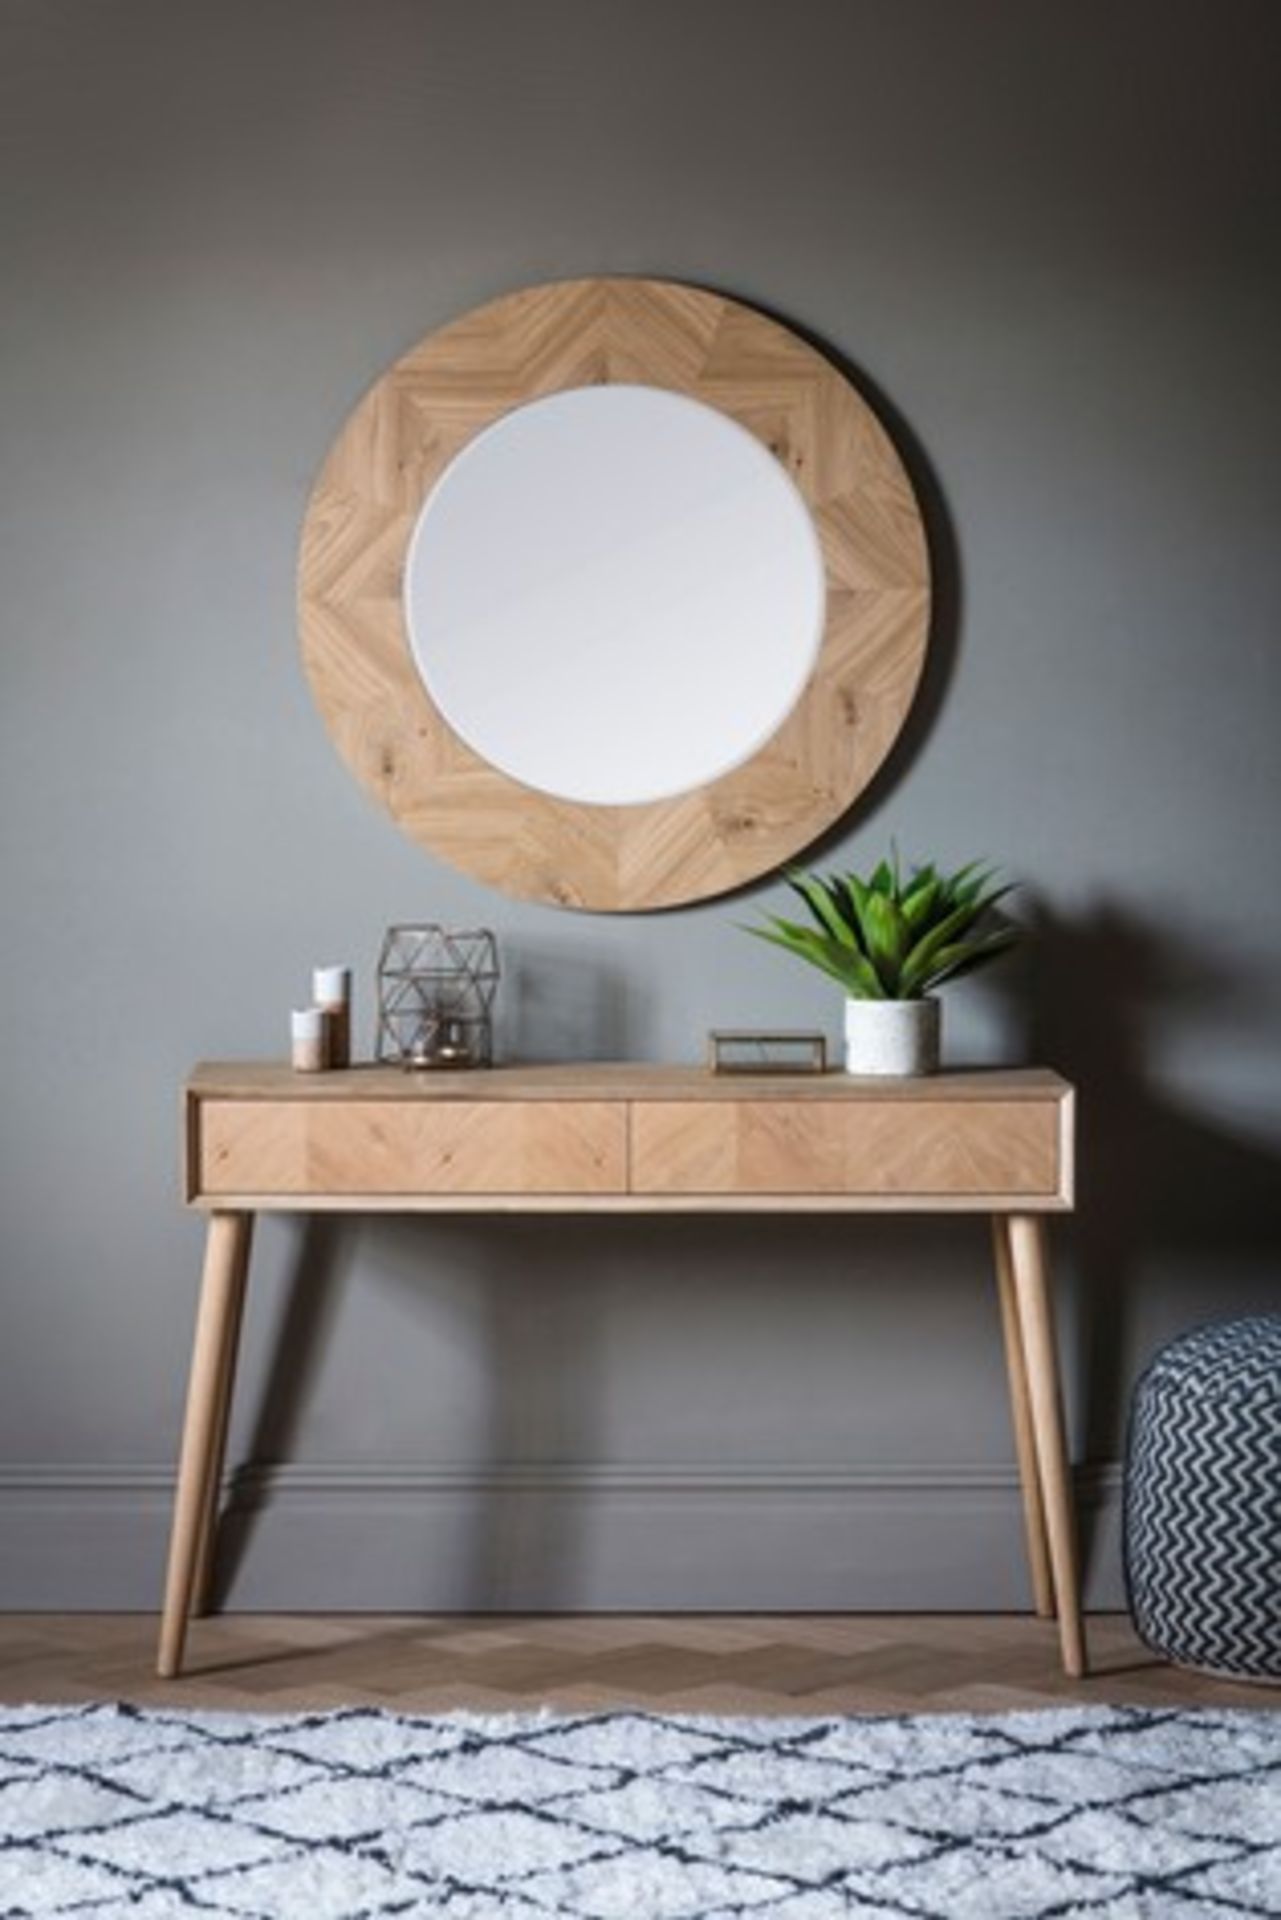 Milano Round Mirror 900 x 25 x 900mm Part Of Our E x Clusive Milano Range Is This Matching Round